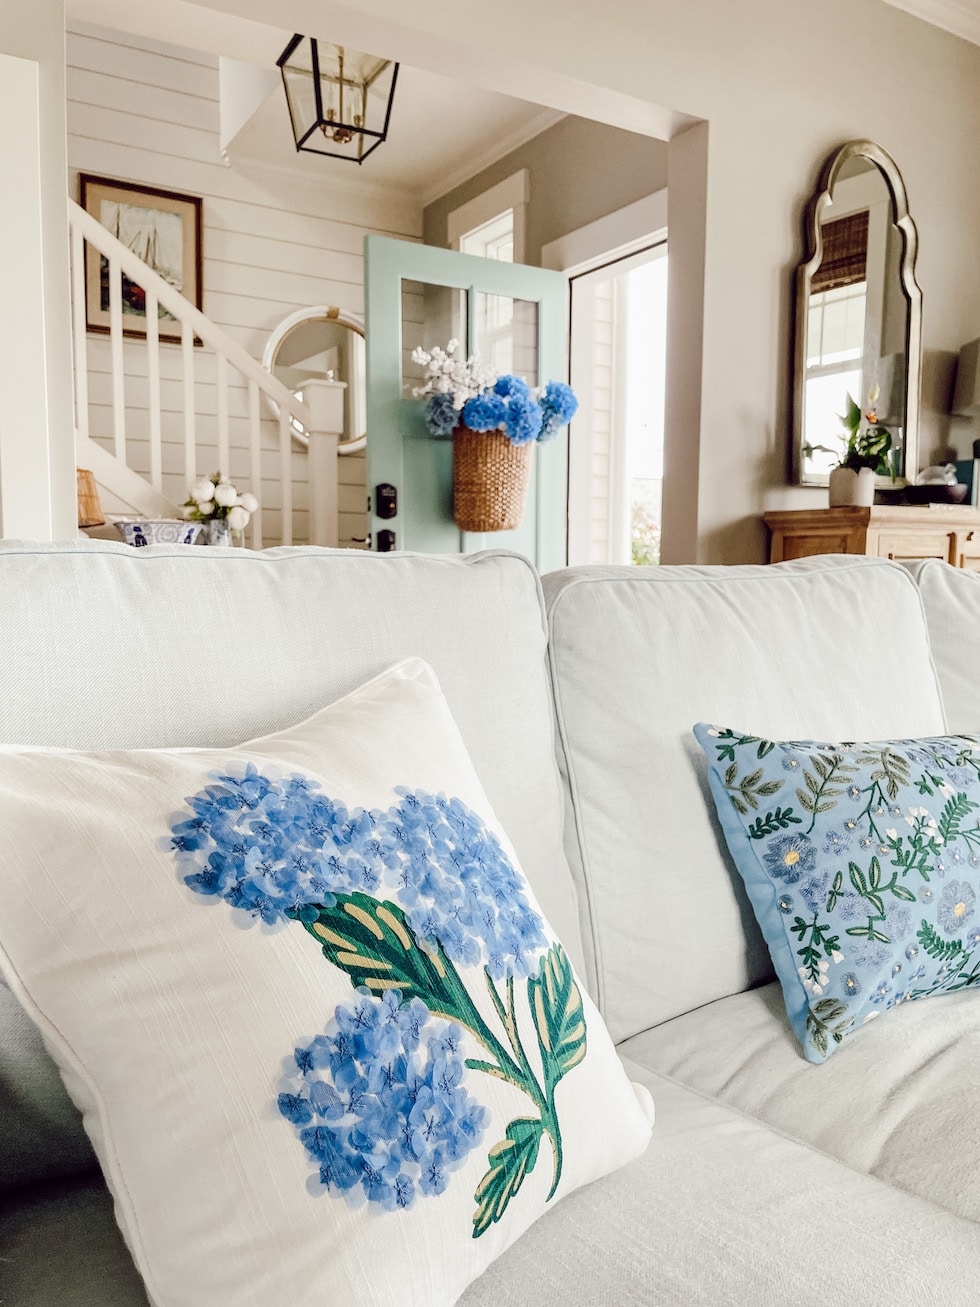 How to Decorate Your Home for Spring (24 Simple Ideas)